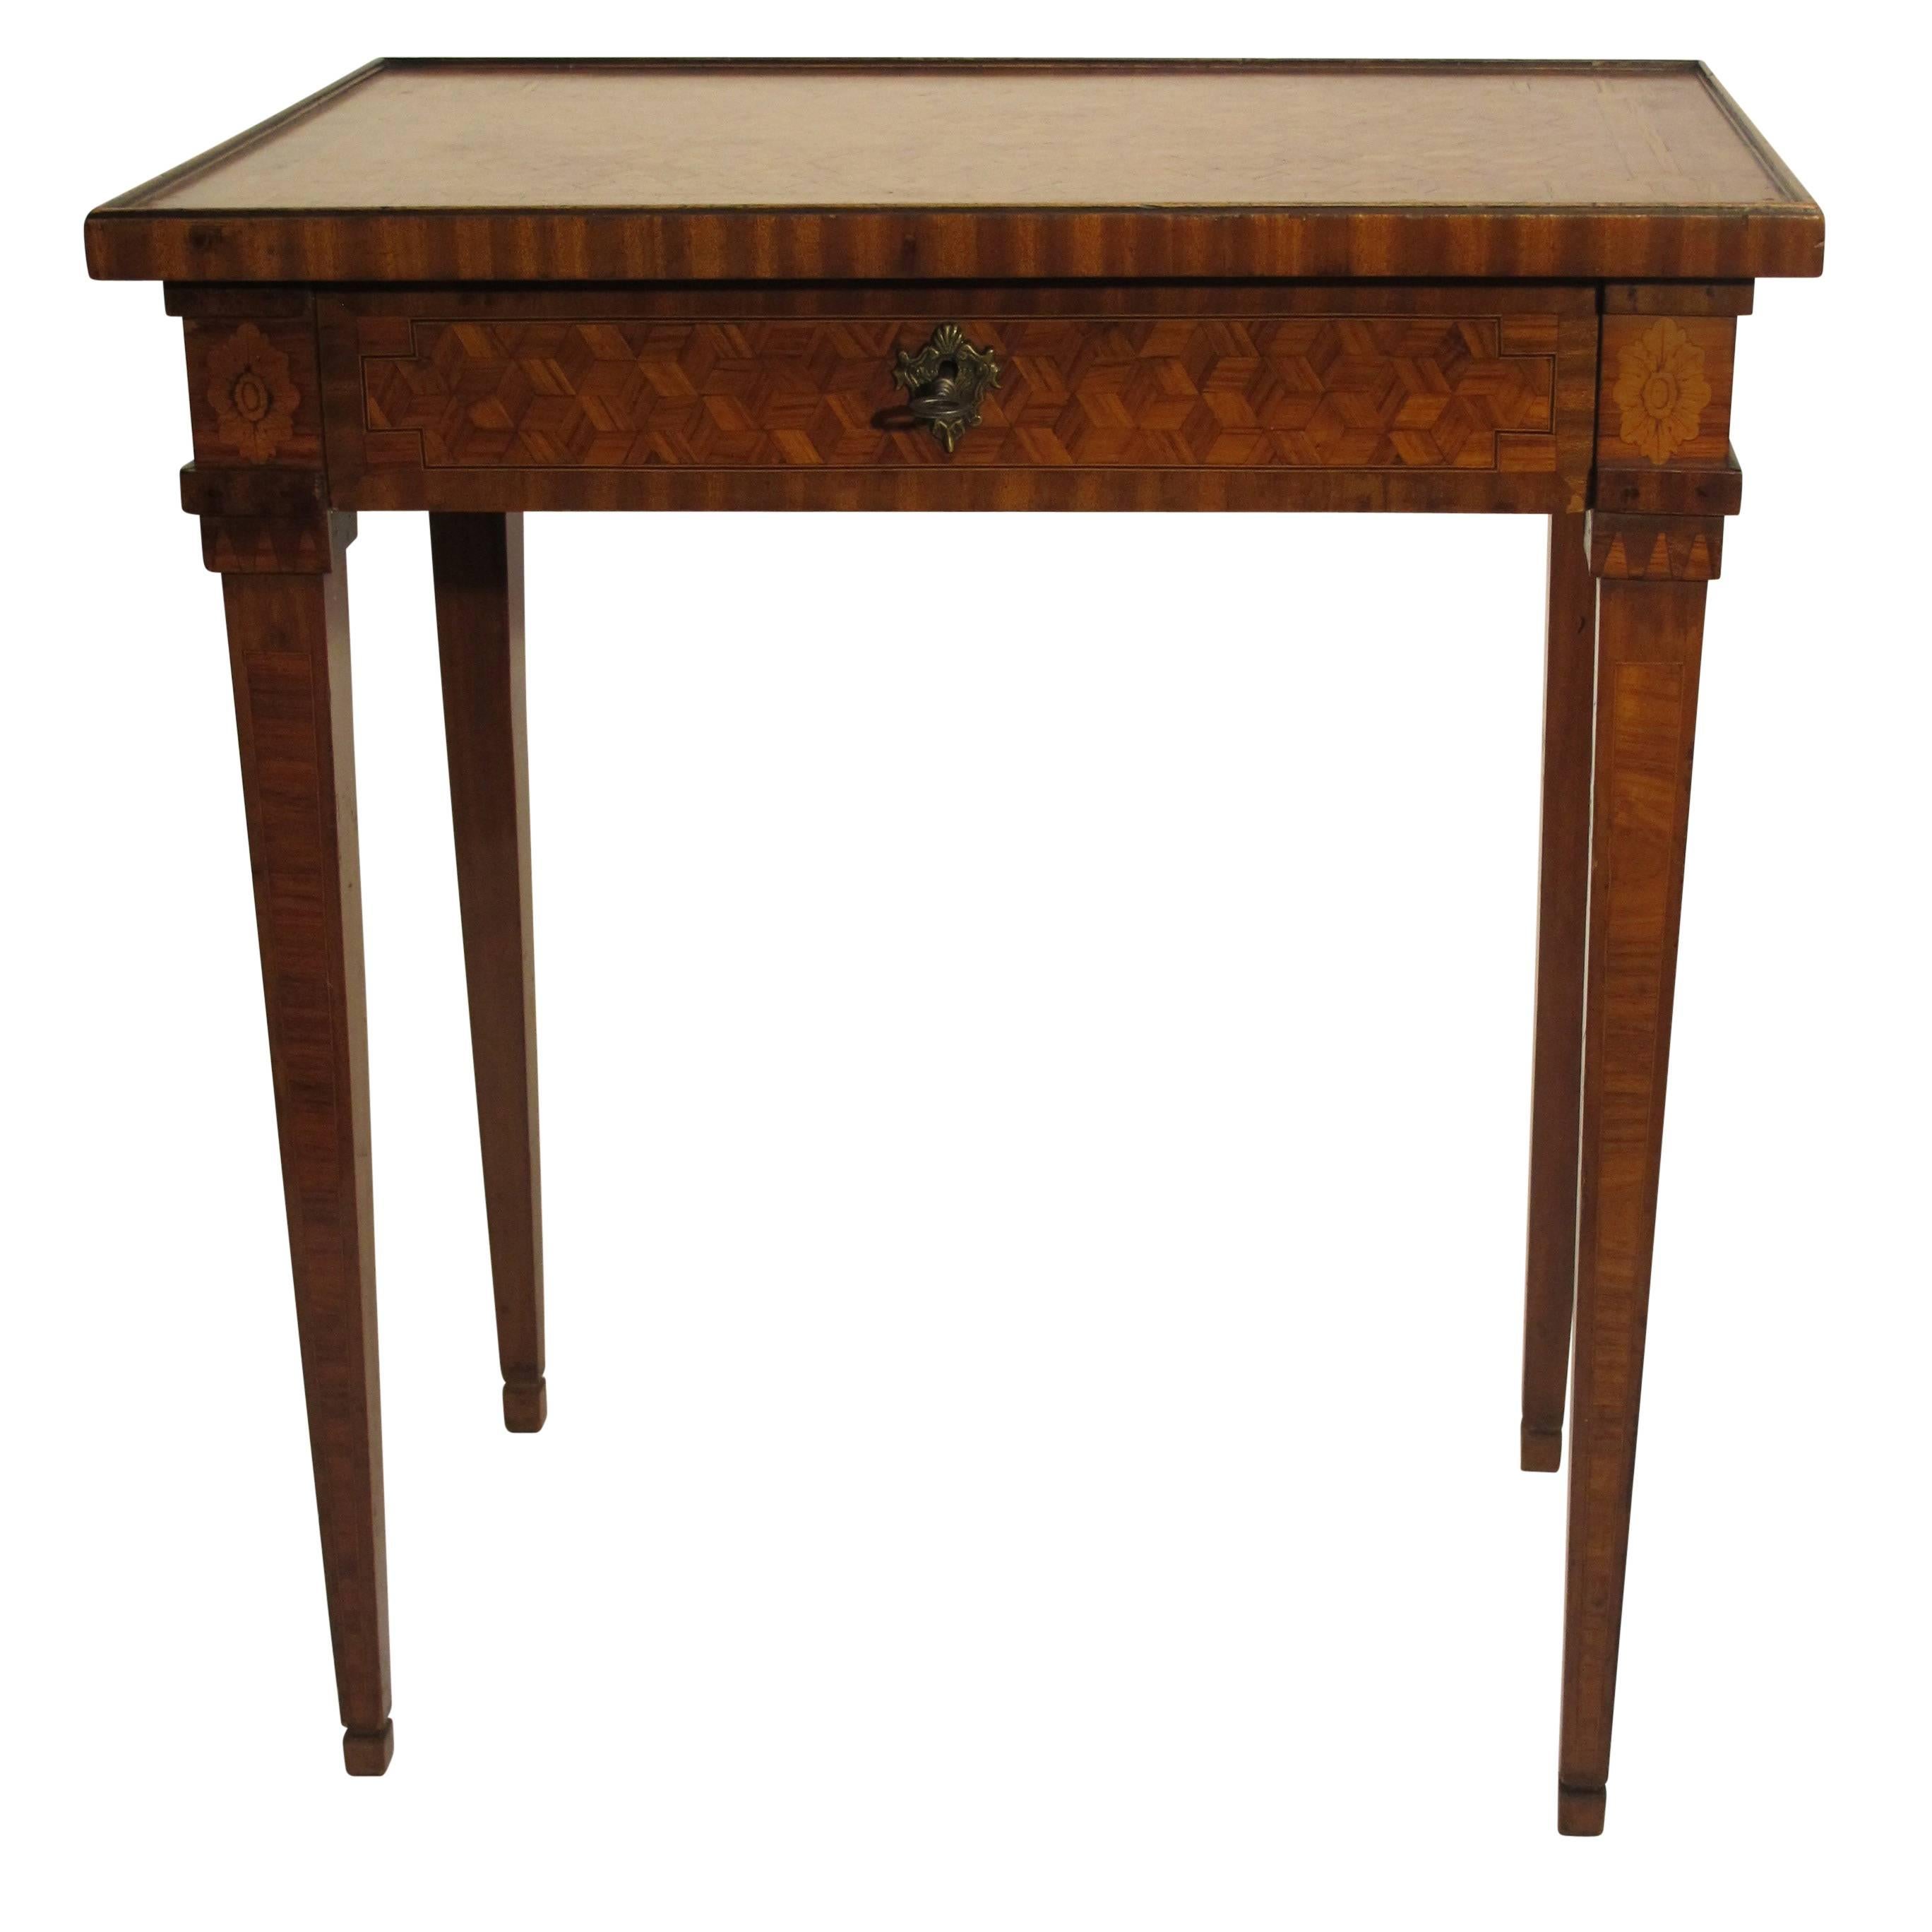 Inlay Walnut and Mixed Fruitwood Parquetry Side Table, French, 18th Century For Sale